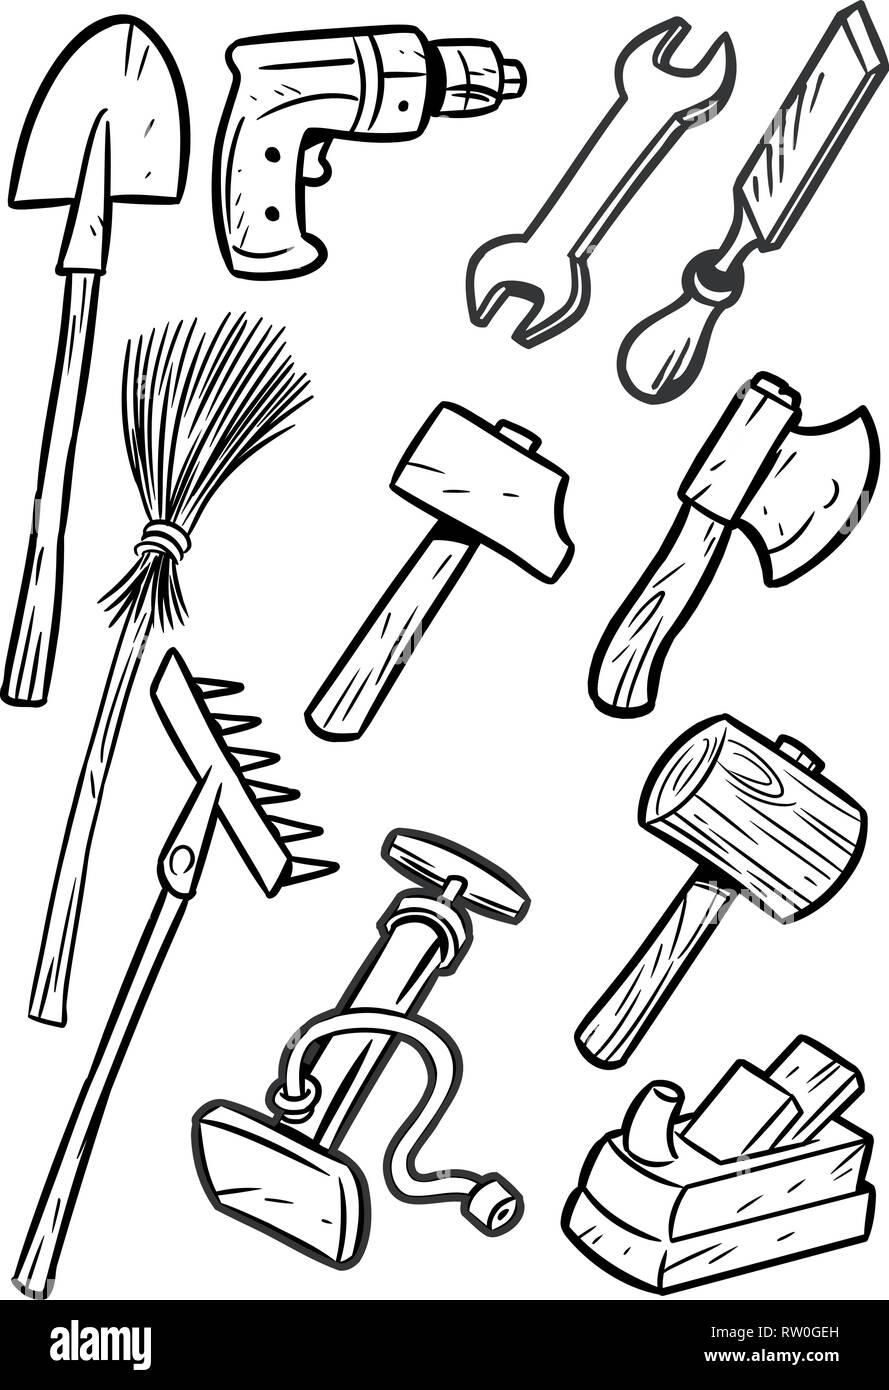 The illustration shows some types of construction tools. Illustration made black outline isolated on white background, on separate layers. Stock Vector